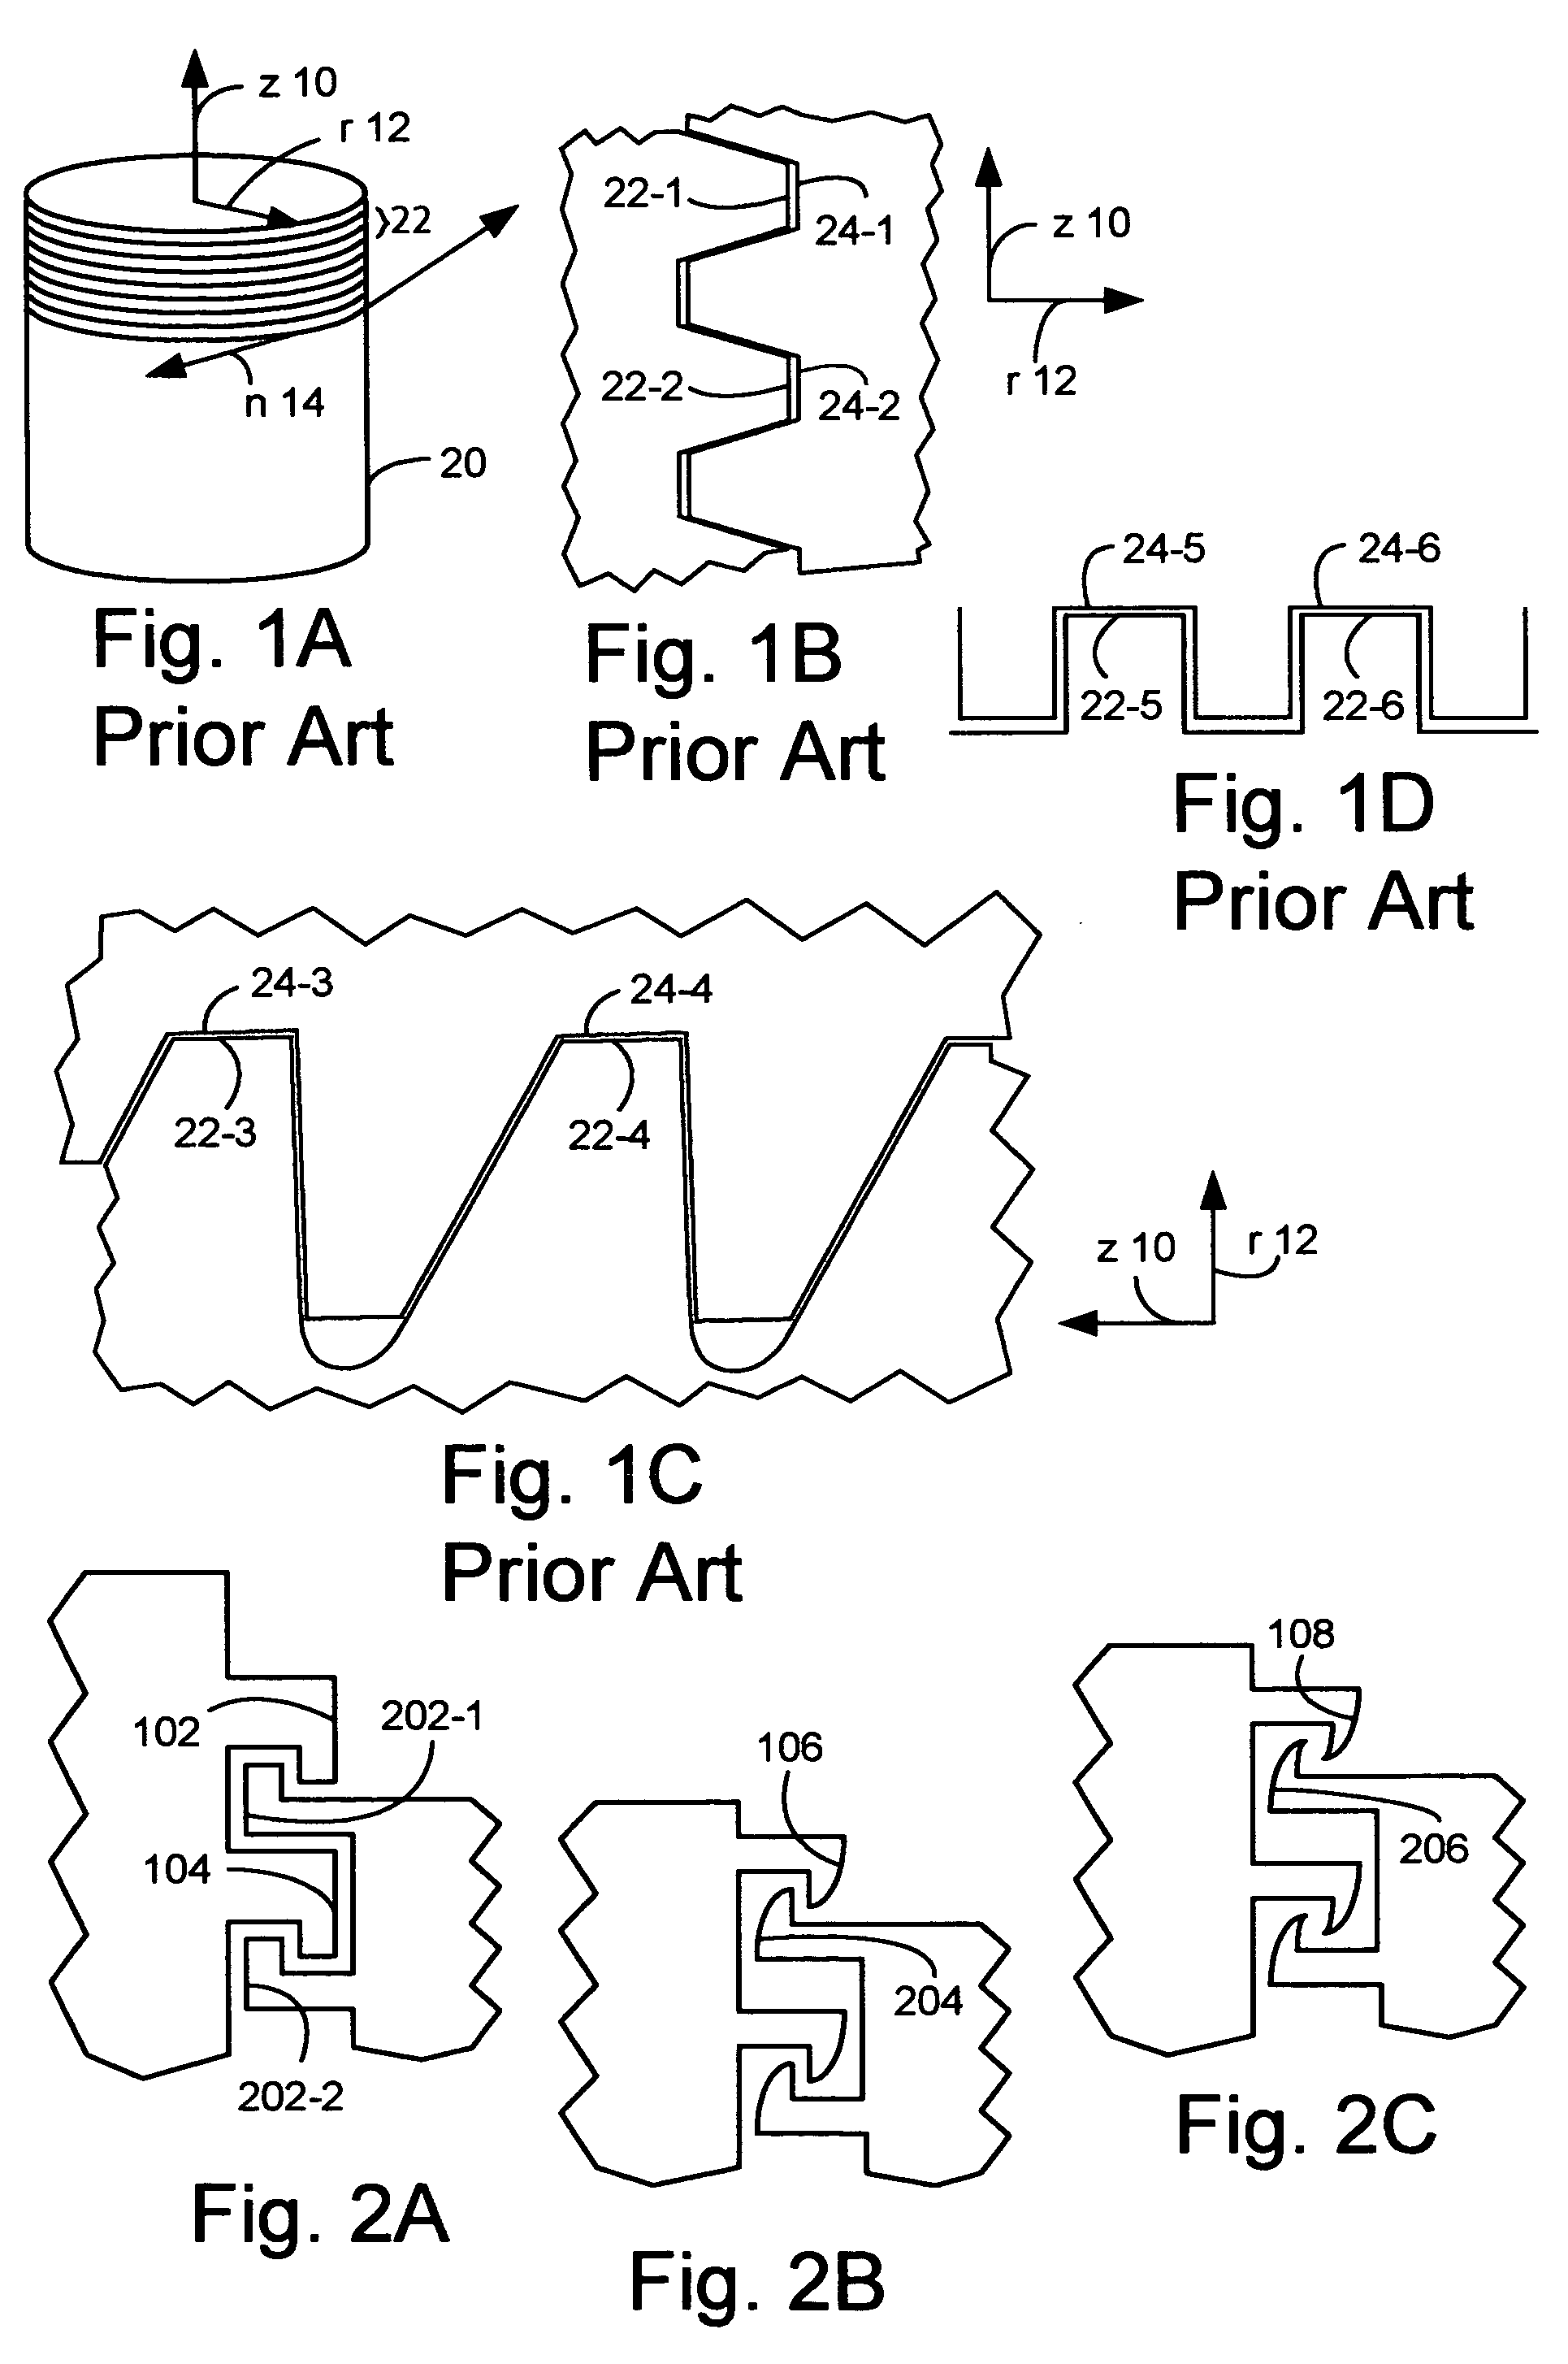 Apparatus and method for reusable, no-waste collapsible tube dispensers